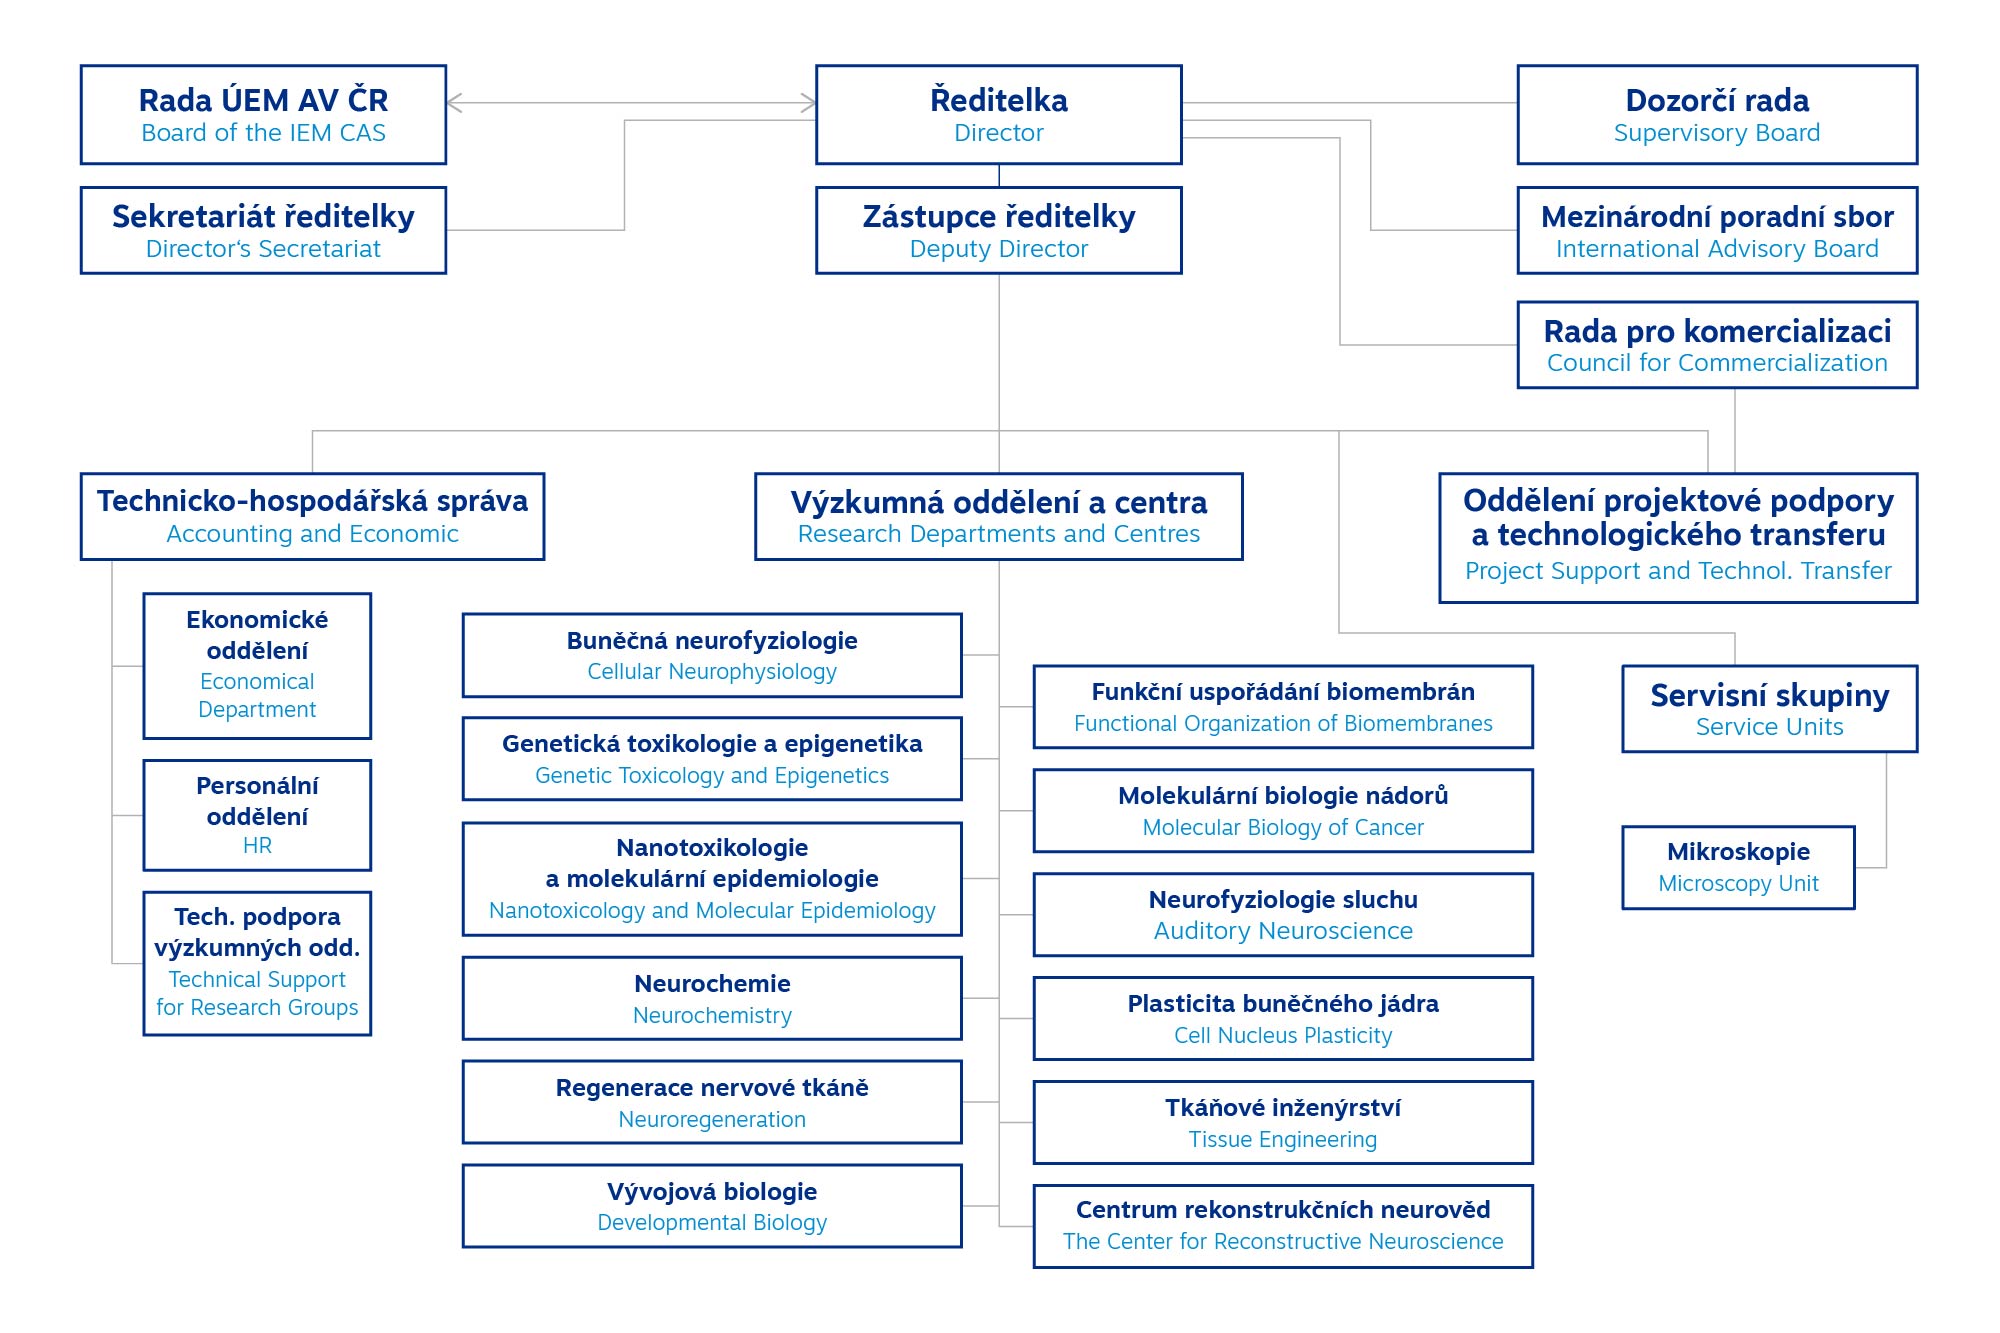 Organizational scheme of the Institute of Experimental Medicine, describing the management, research and technical departments and their relationships. Detailed description is in the picture description.